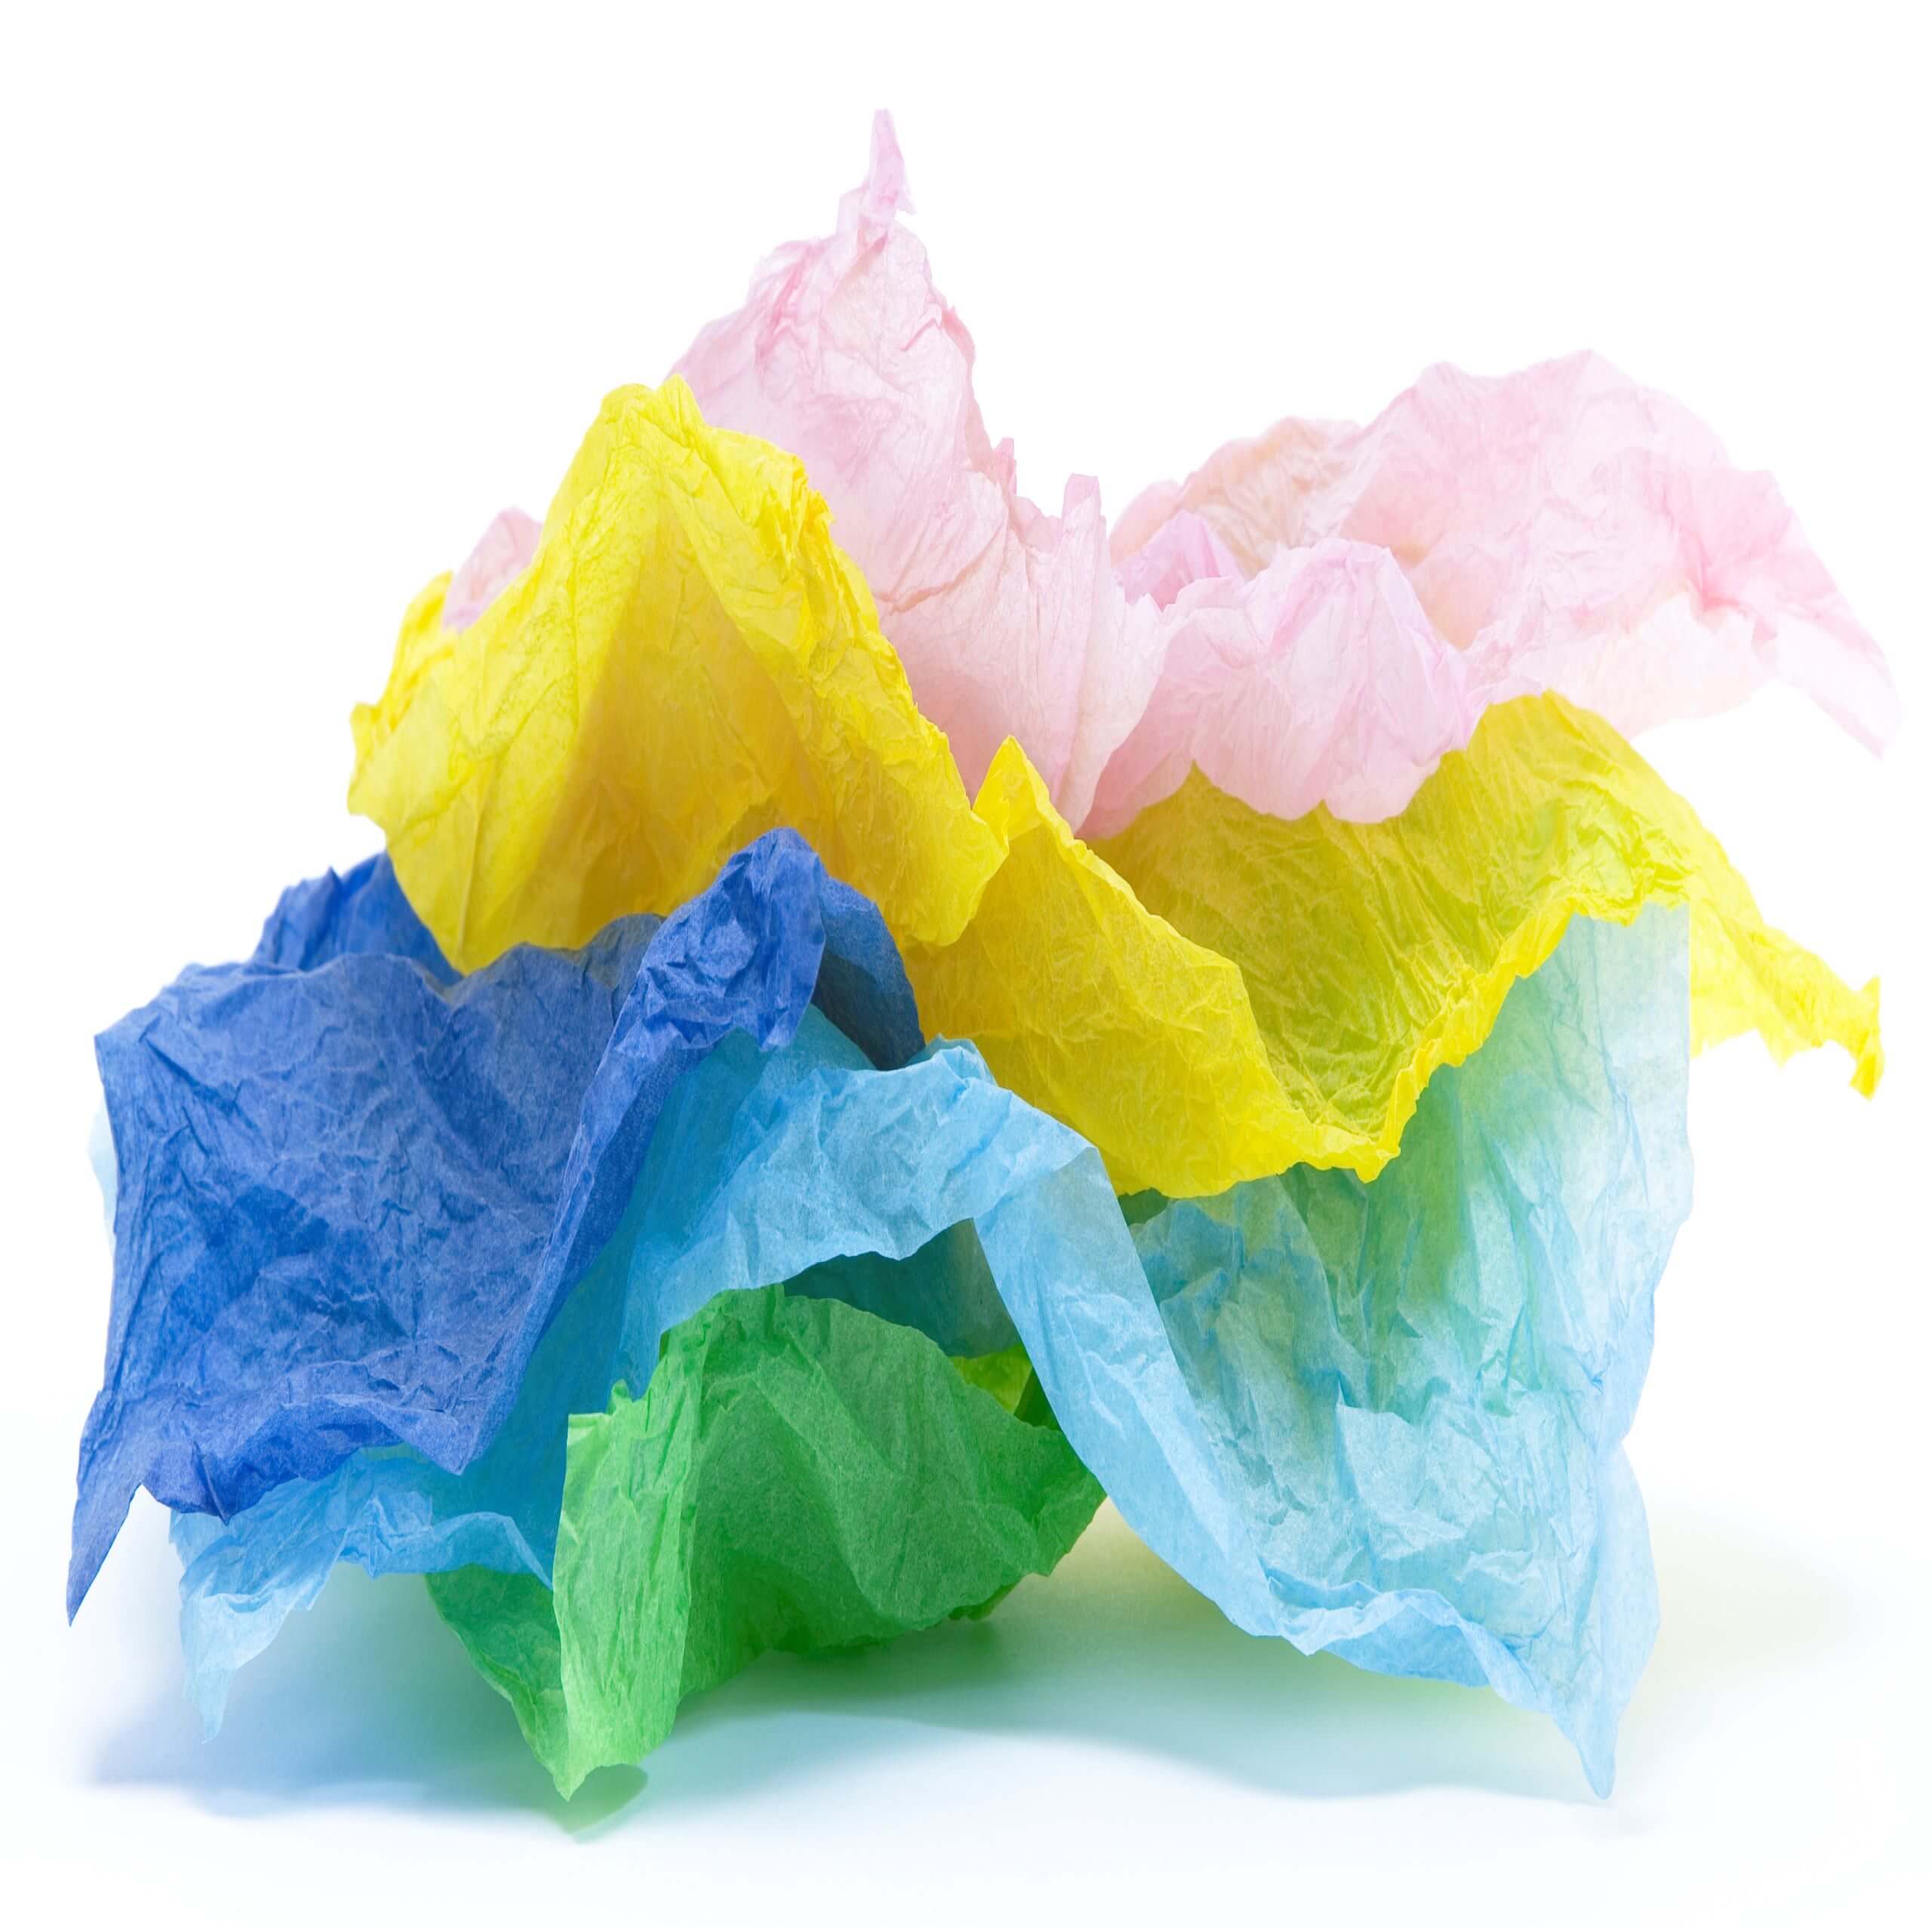 An image of colourful Tissue Gift Wrap.